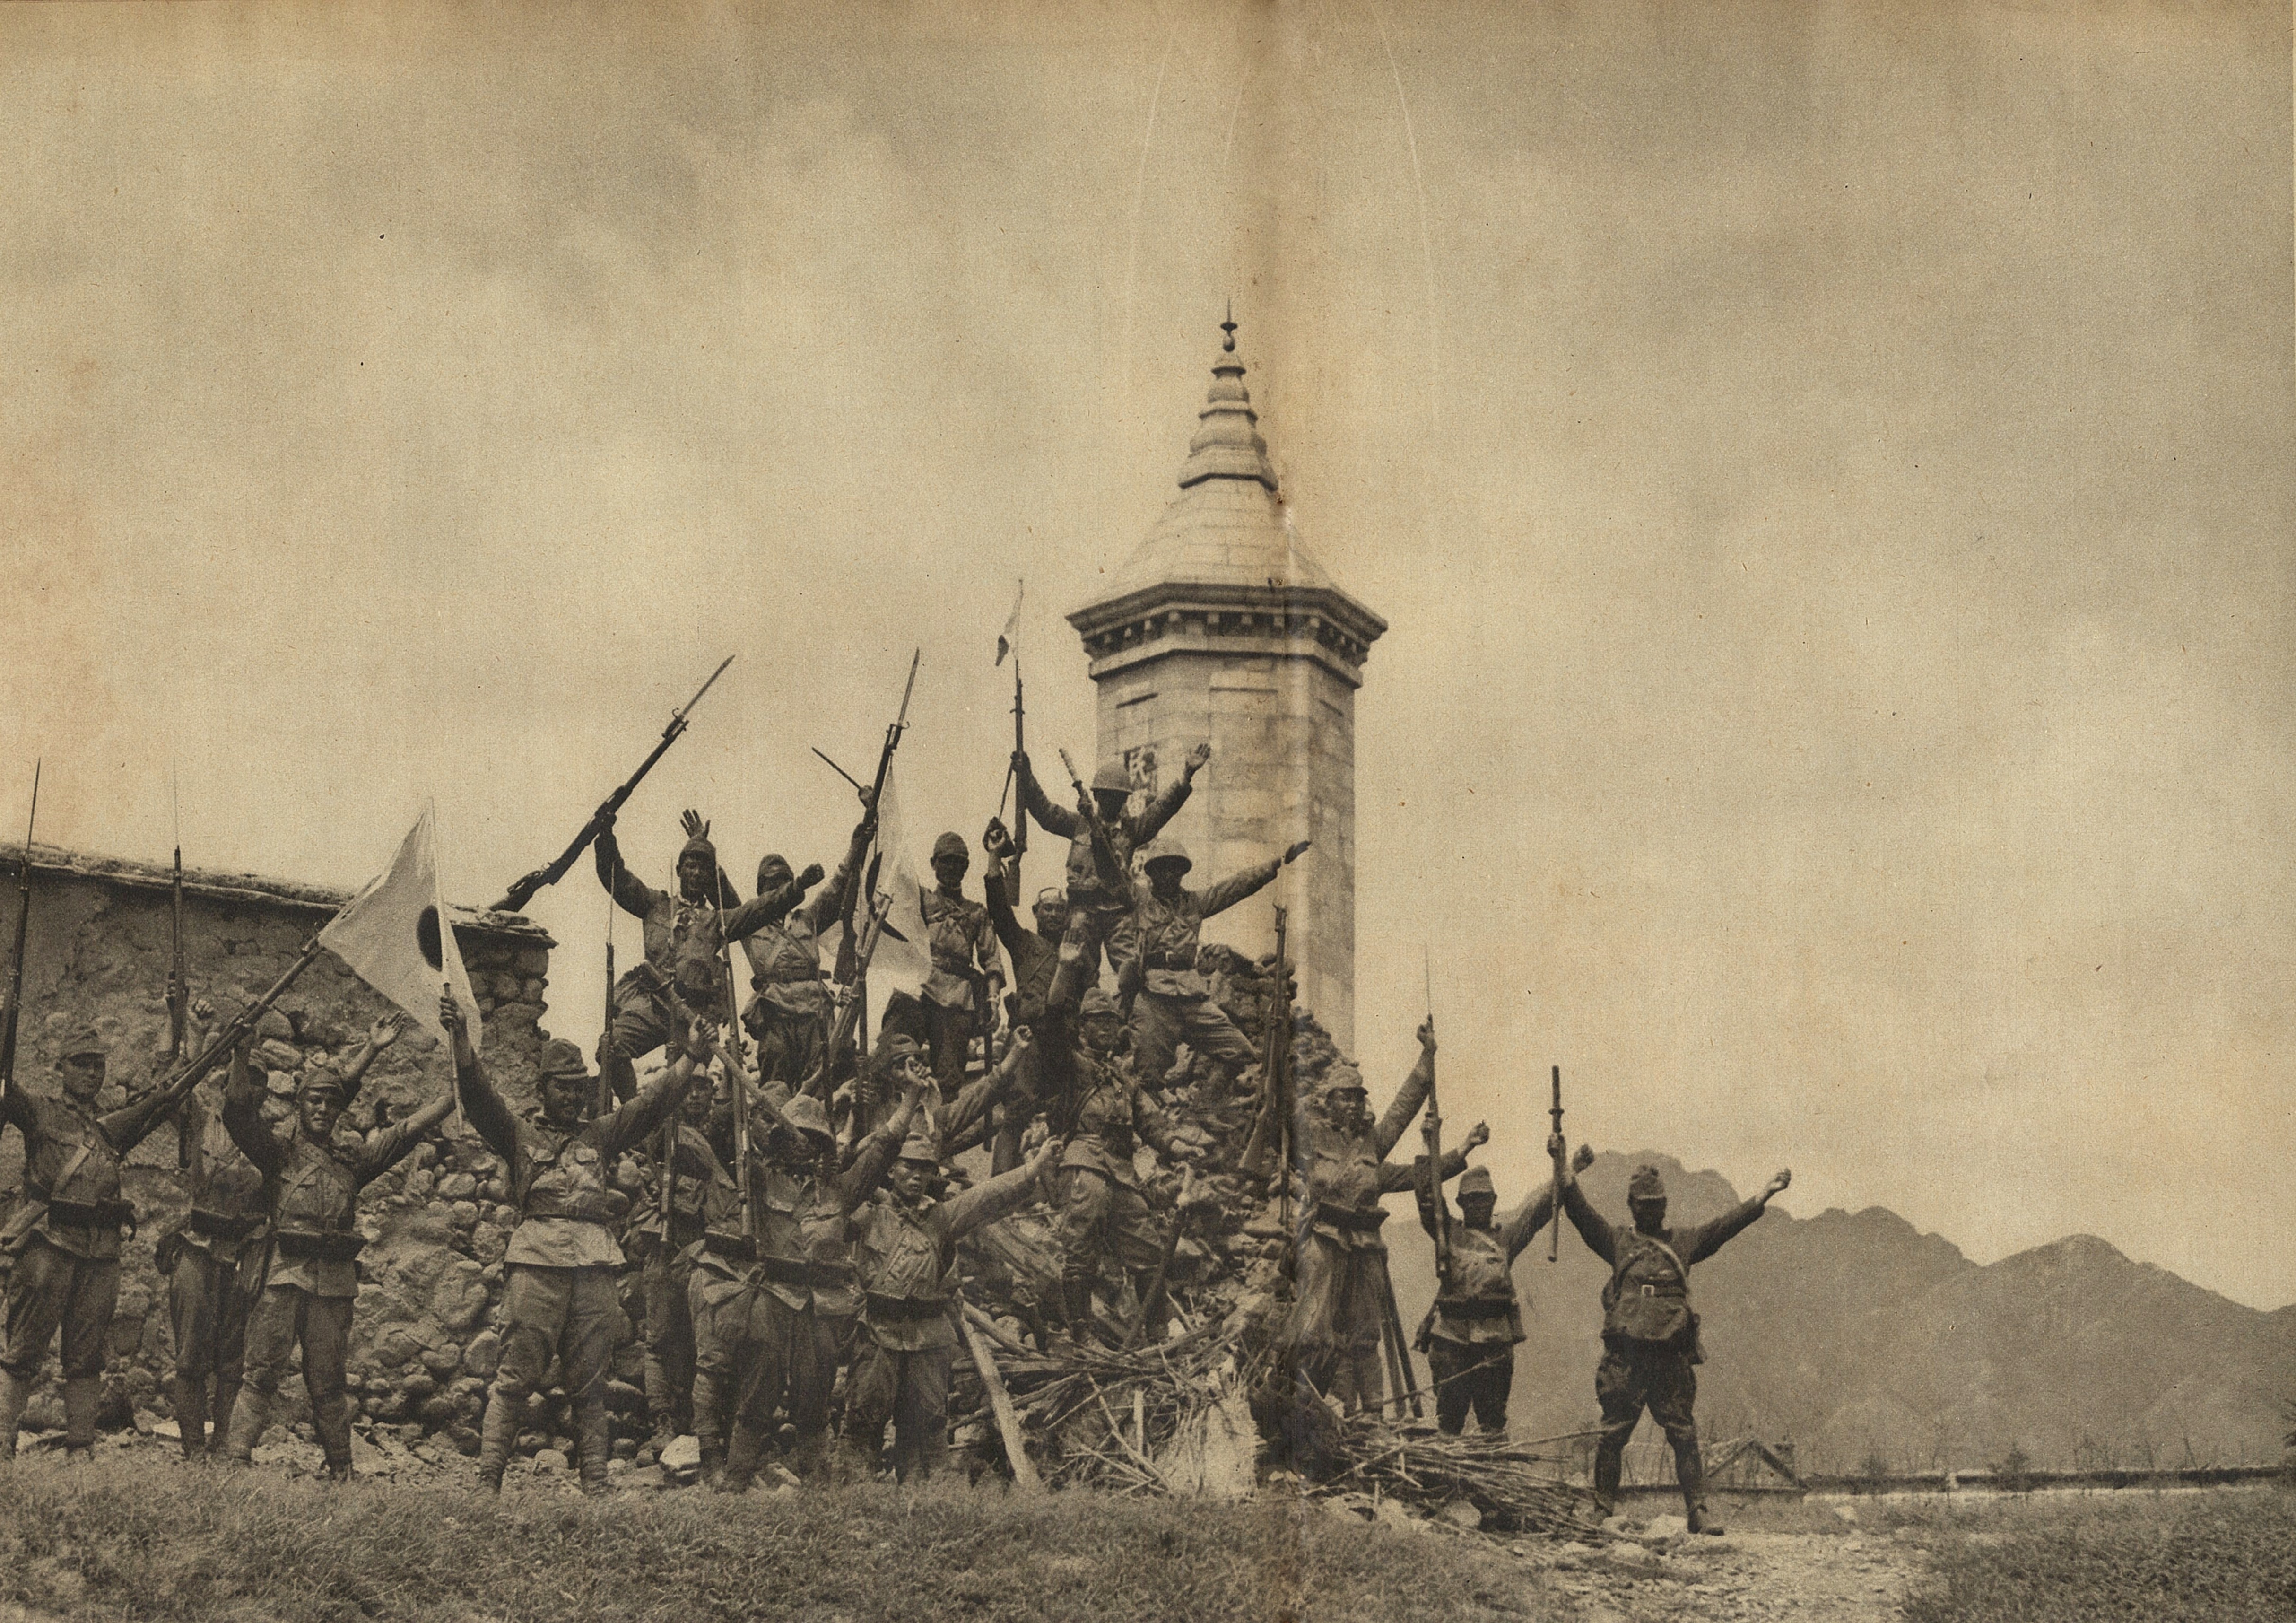 A group of Japanese Army officers and men cheering at Nankou, Beiping, China, 1937; seen in the 1 Sep 1937 issue of the Japanese publication Asahigraph